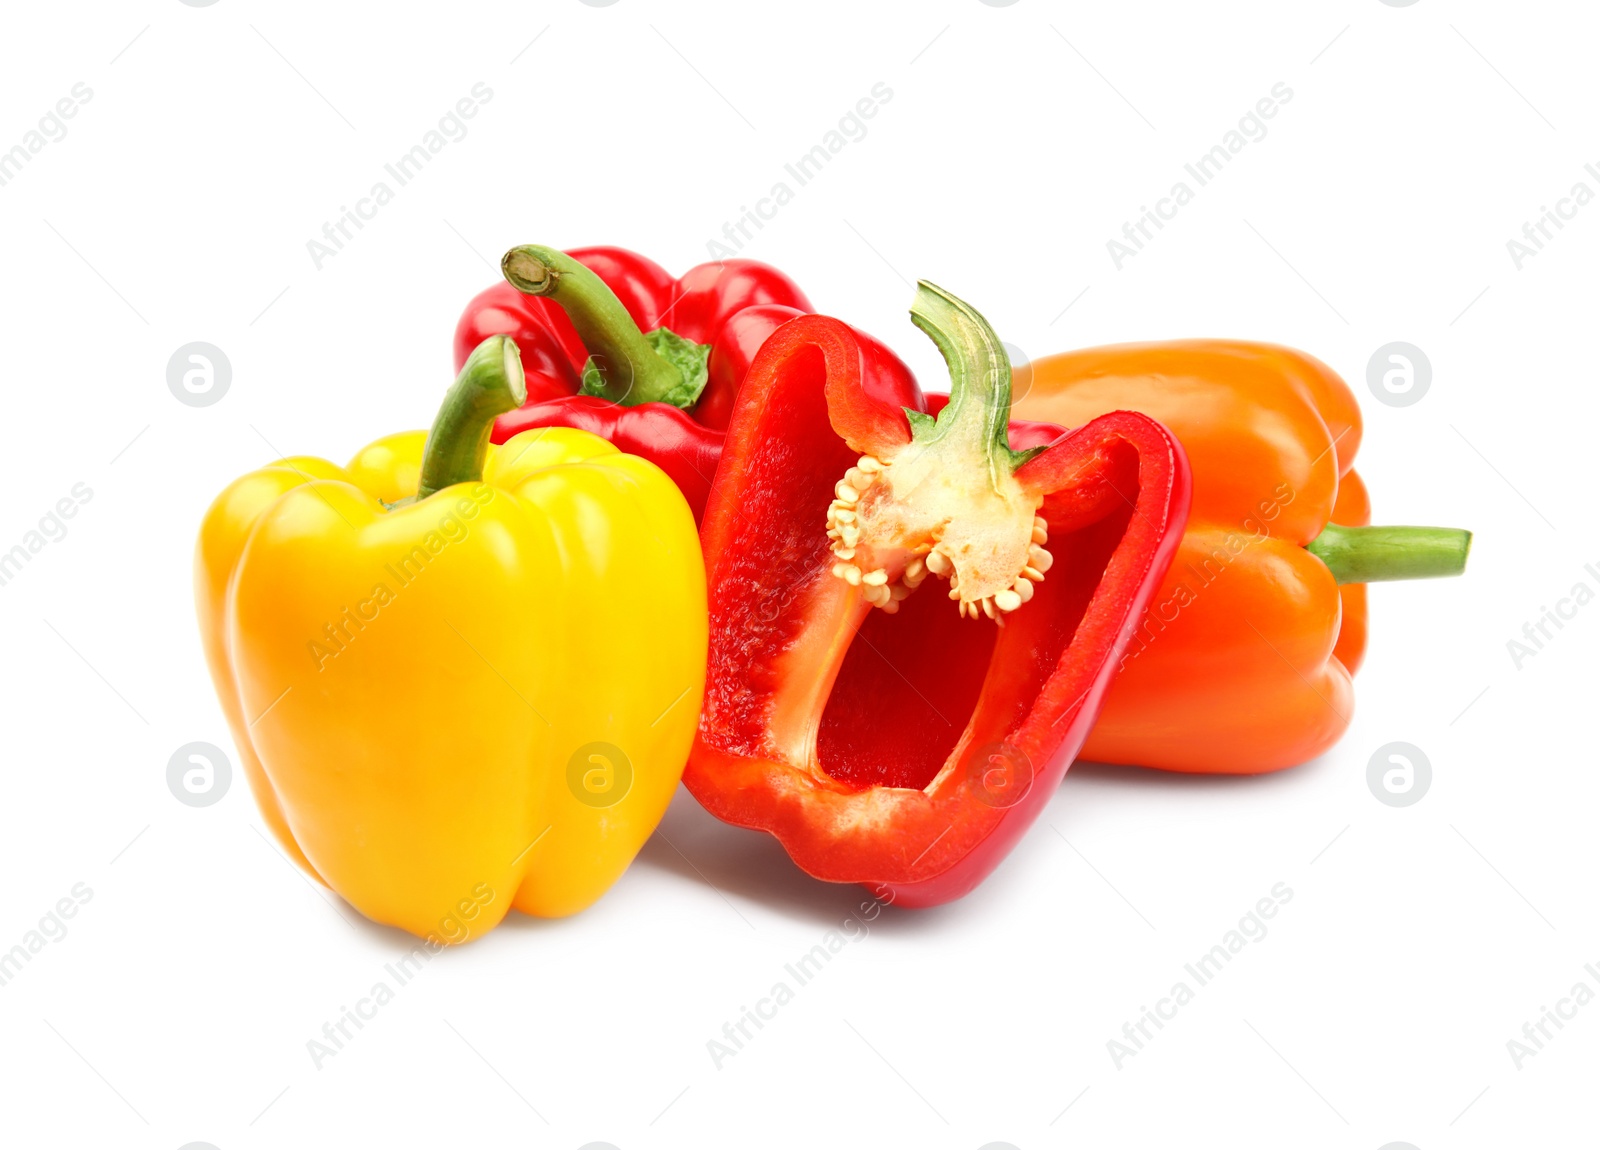 Photo of Whole and cut bell peppers on white background